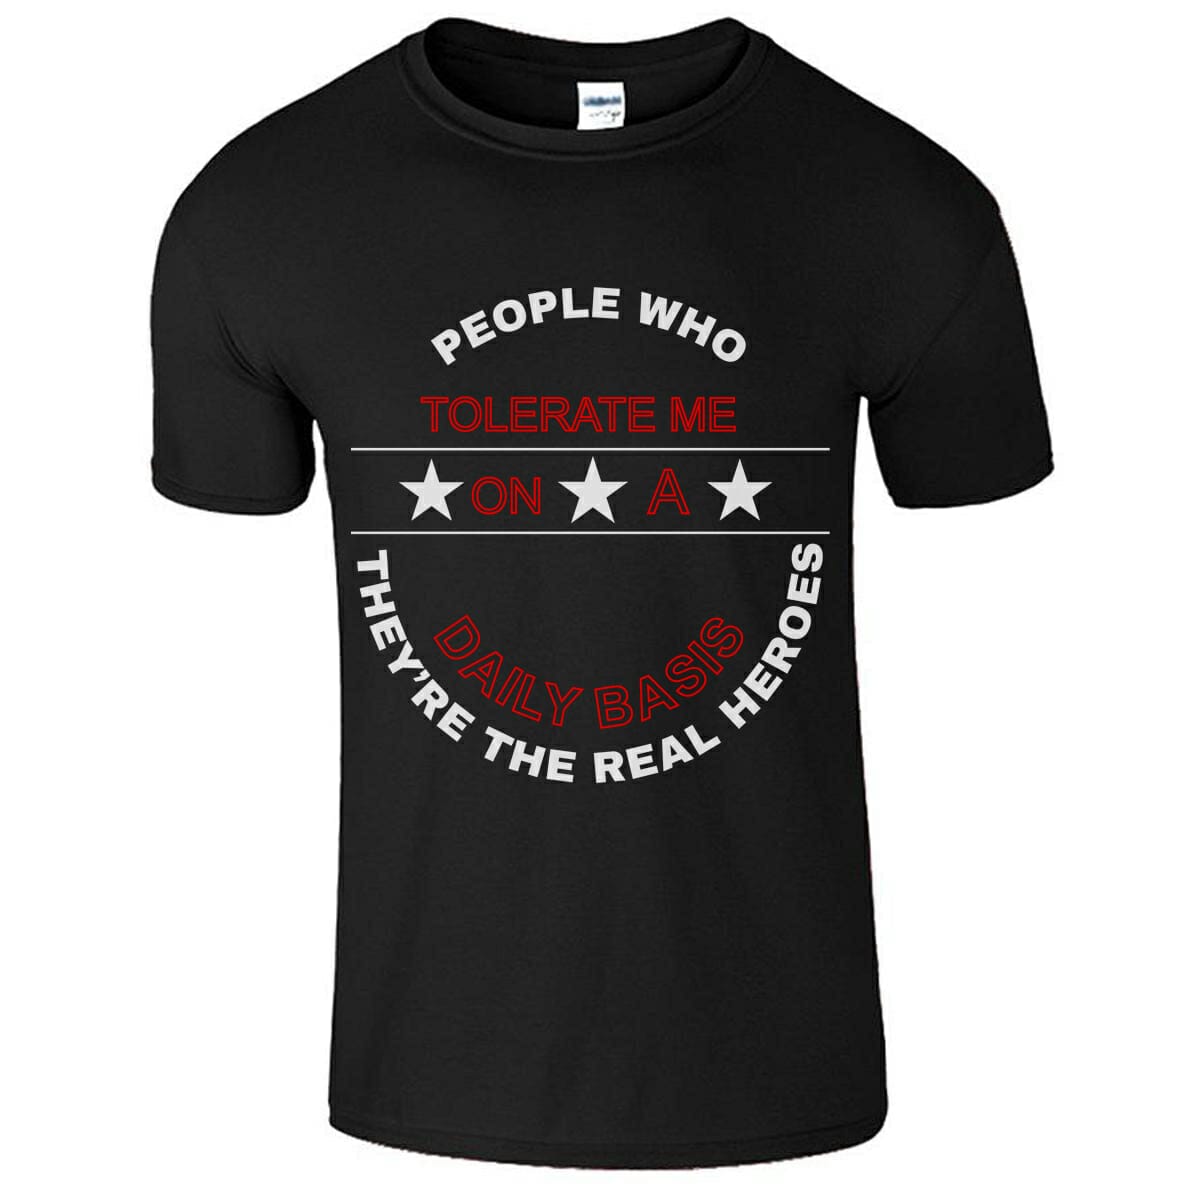 People Who Tolerate Me - Funny T-Shirt Design